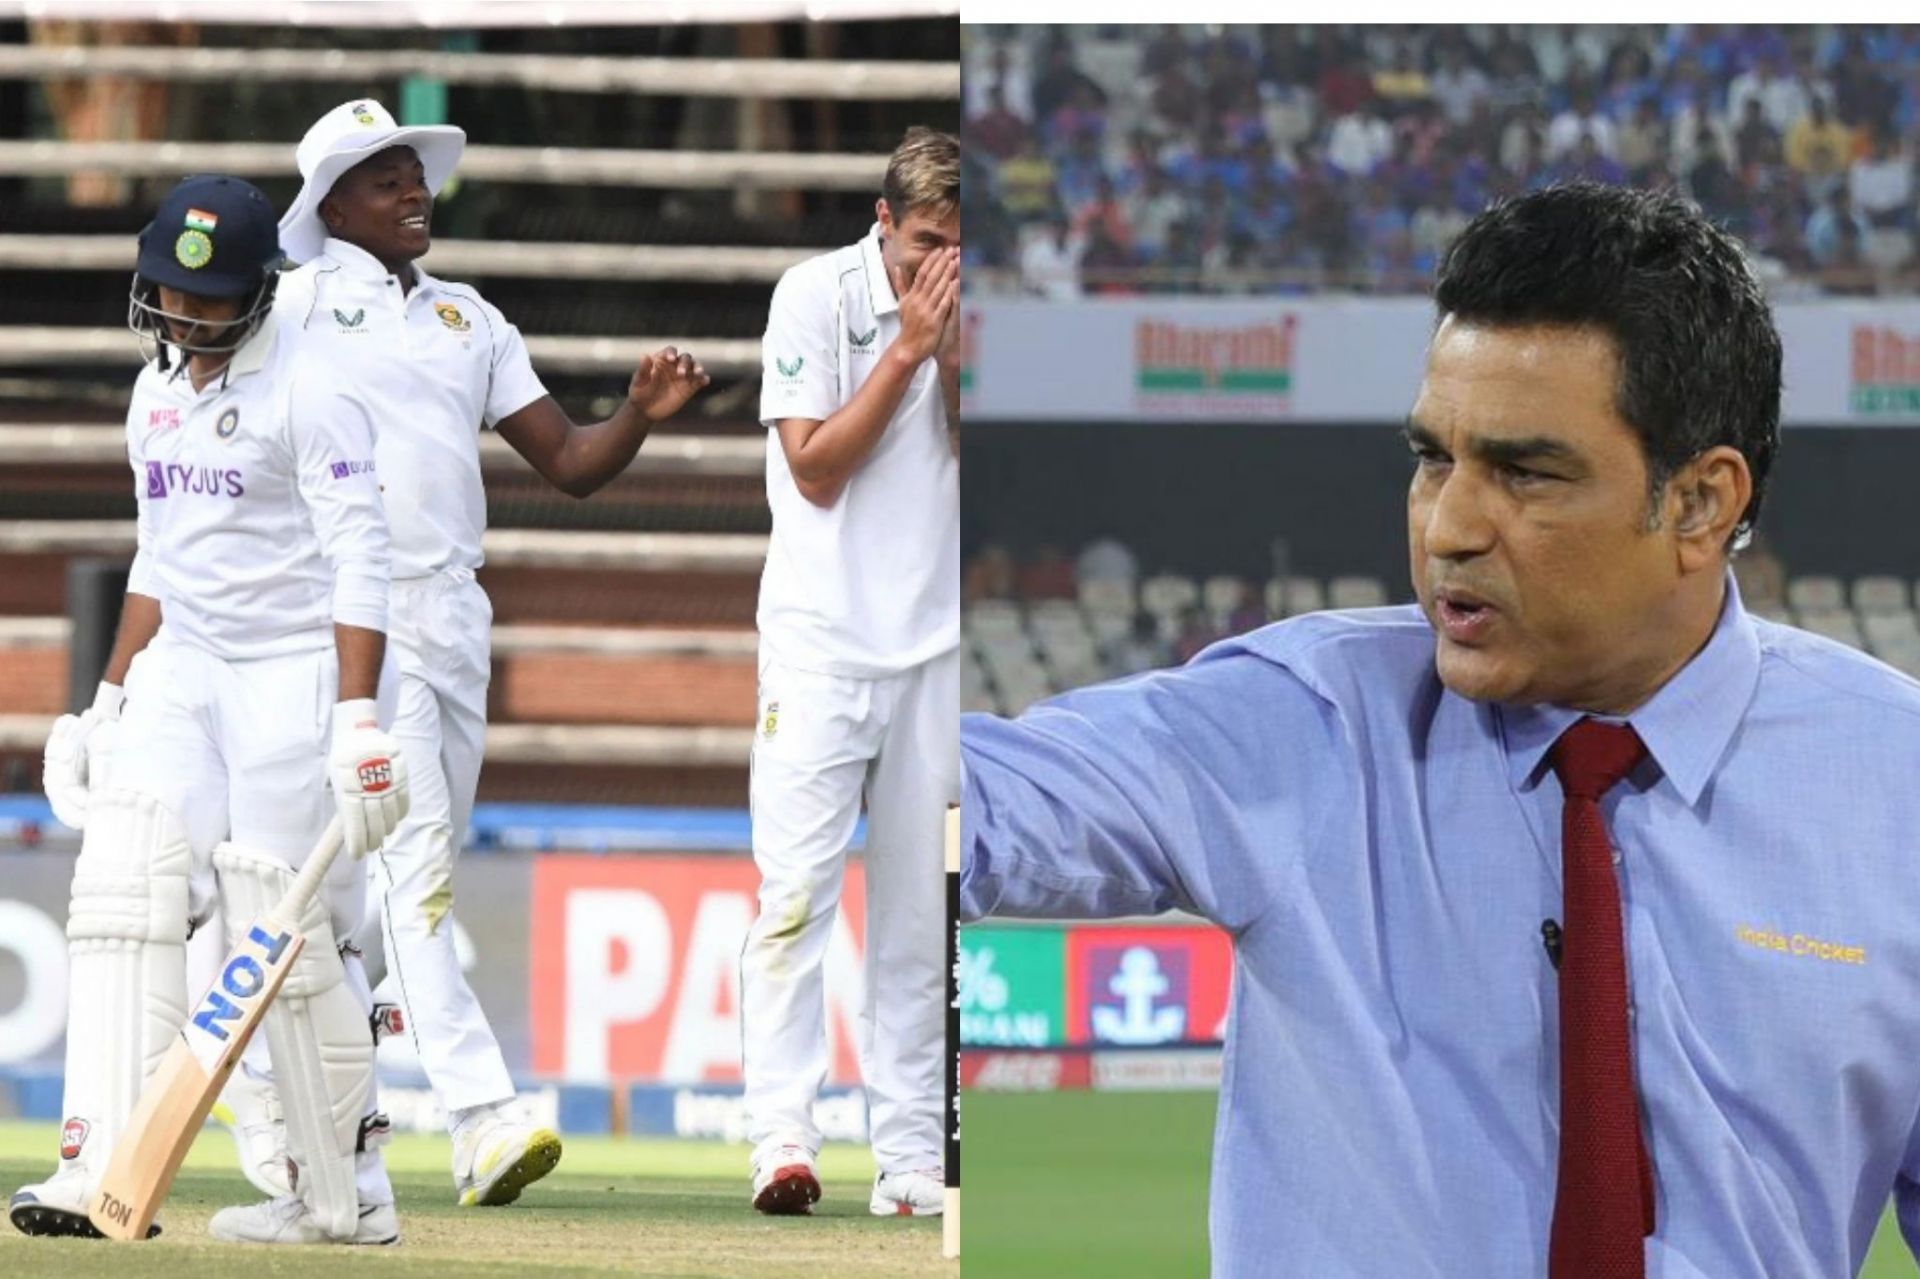 Sanjay Manjrekar (R) feels India are still in the game even after being bundled out for 202